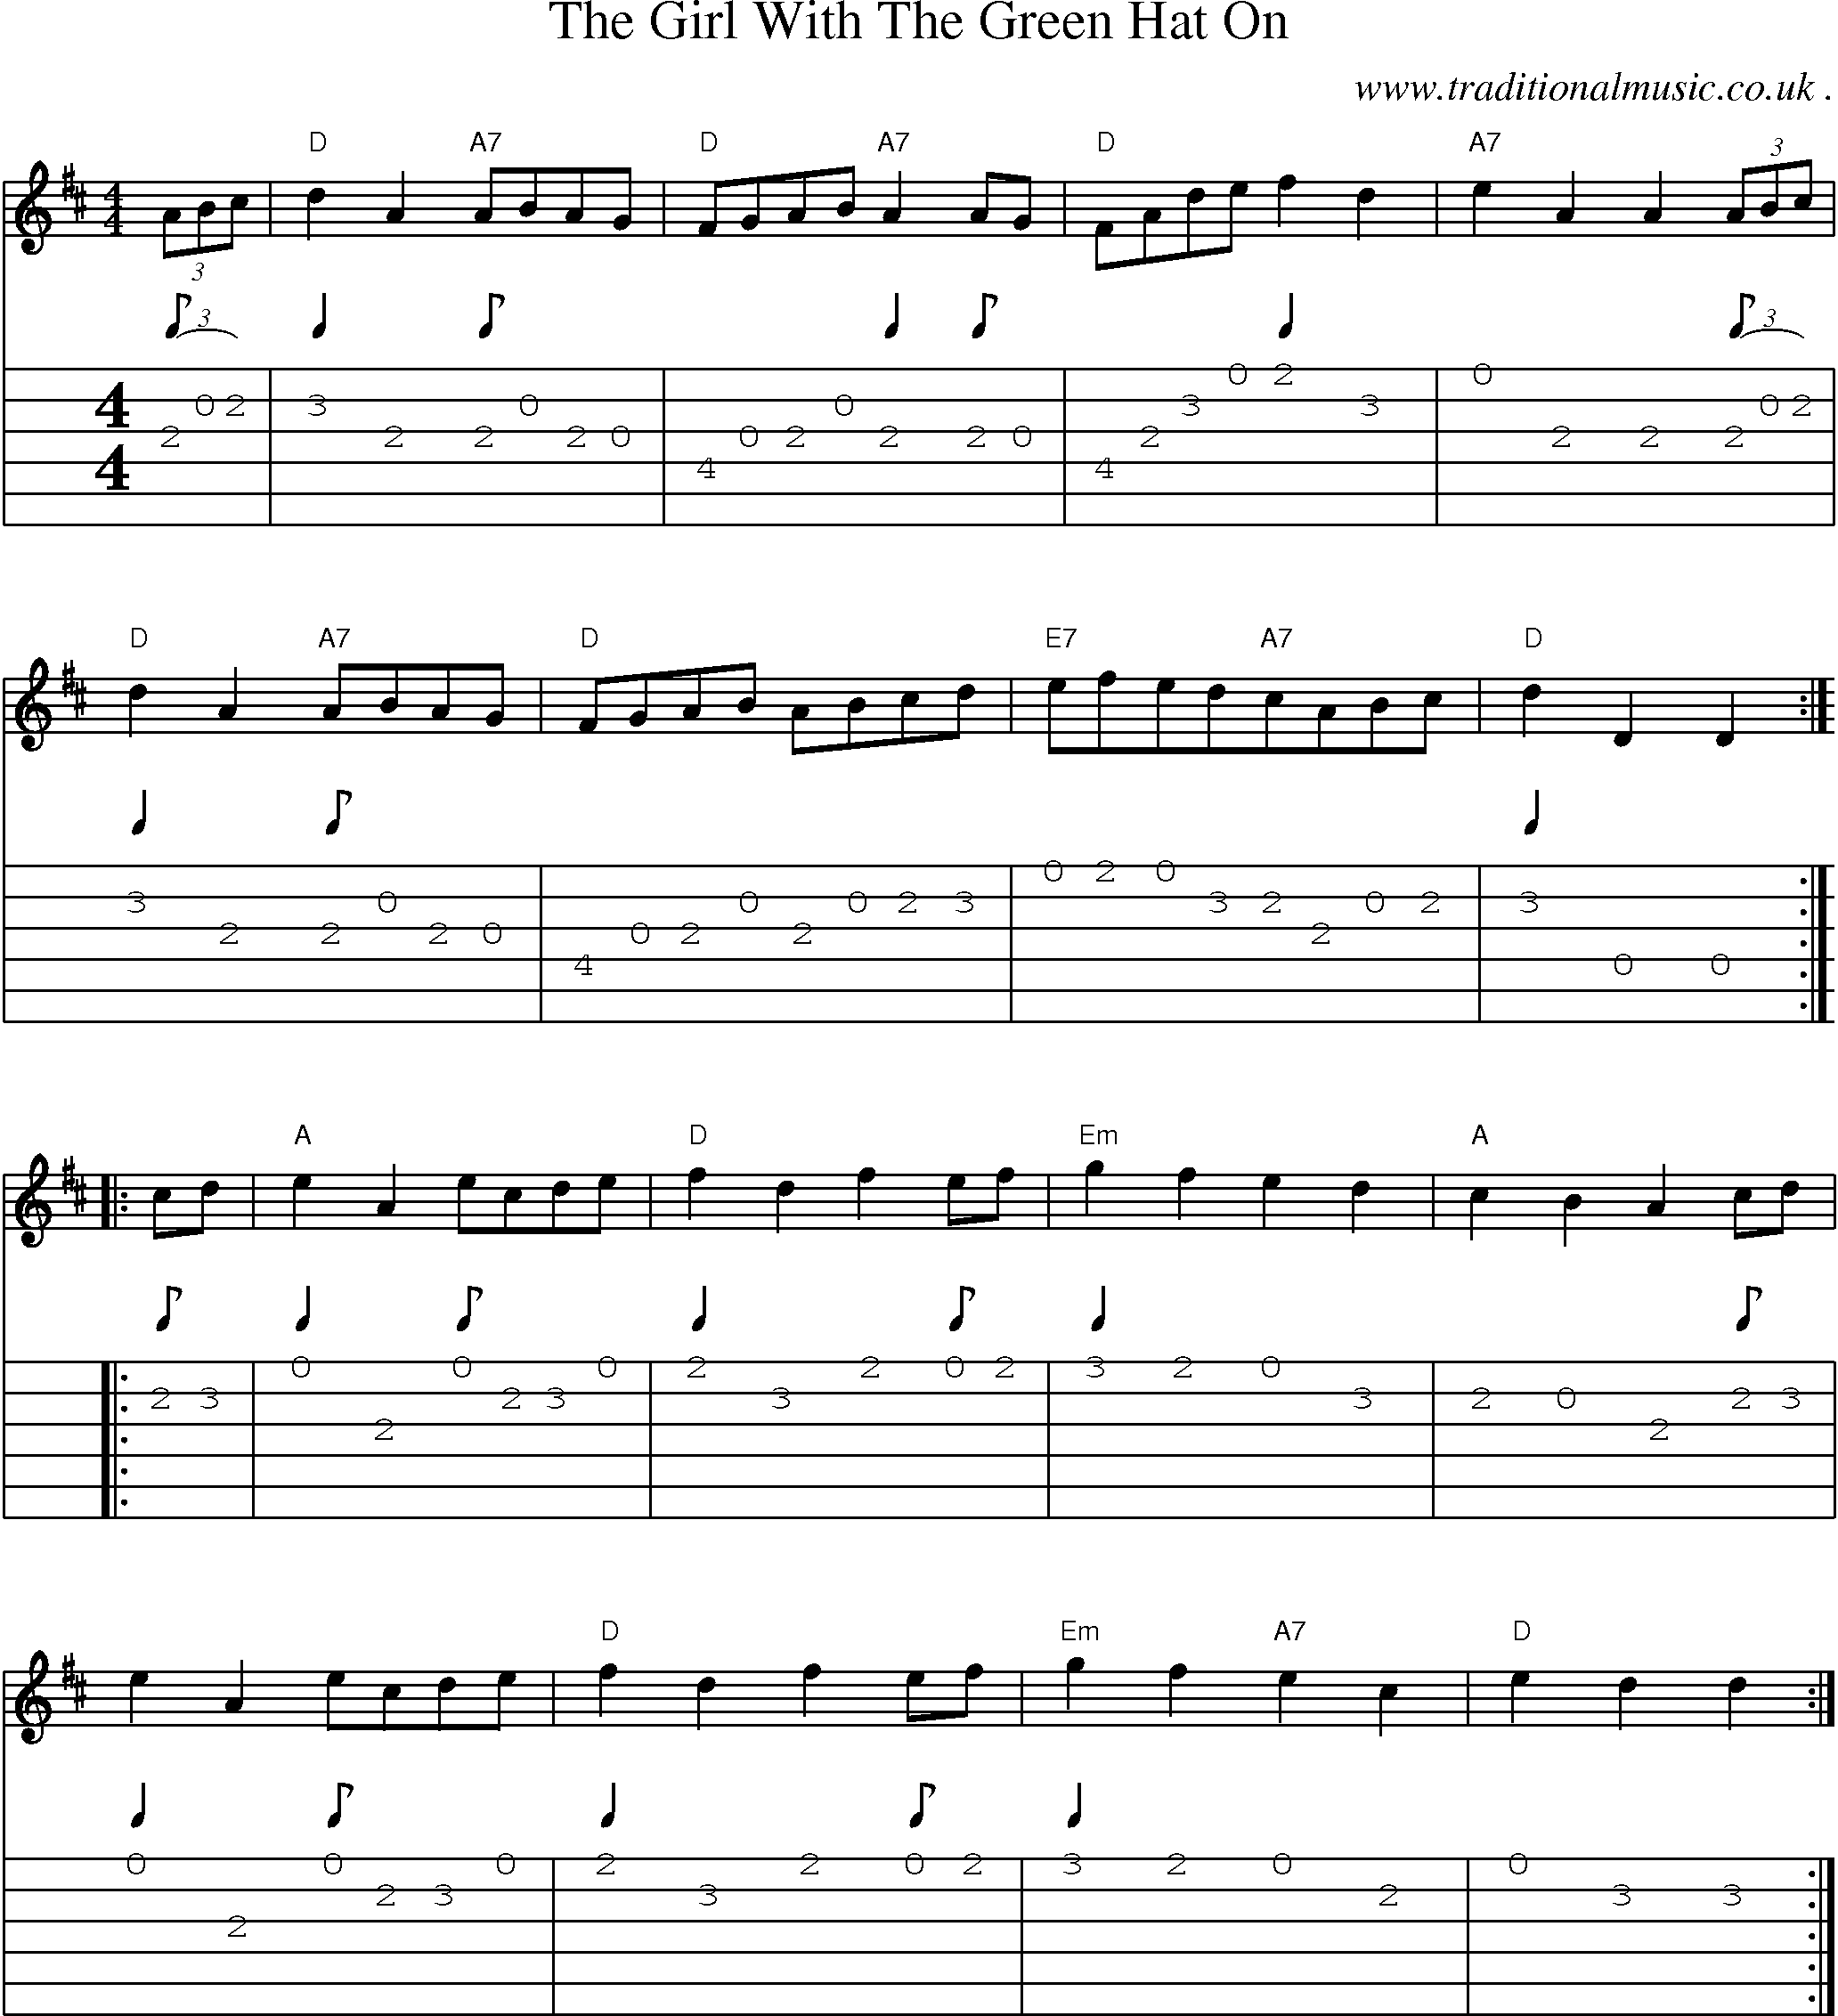 Sheet-Music and Guitar Tabs for The Girl With The Green Hat On